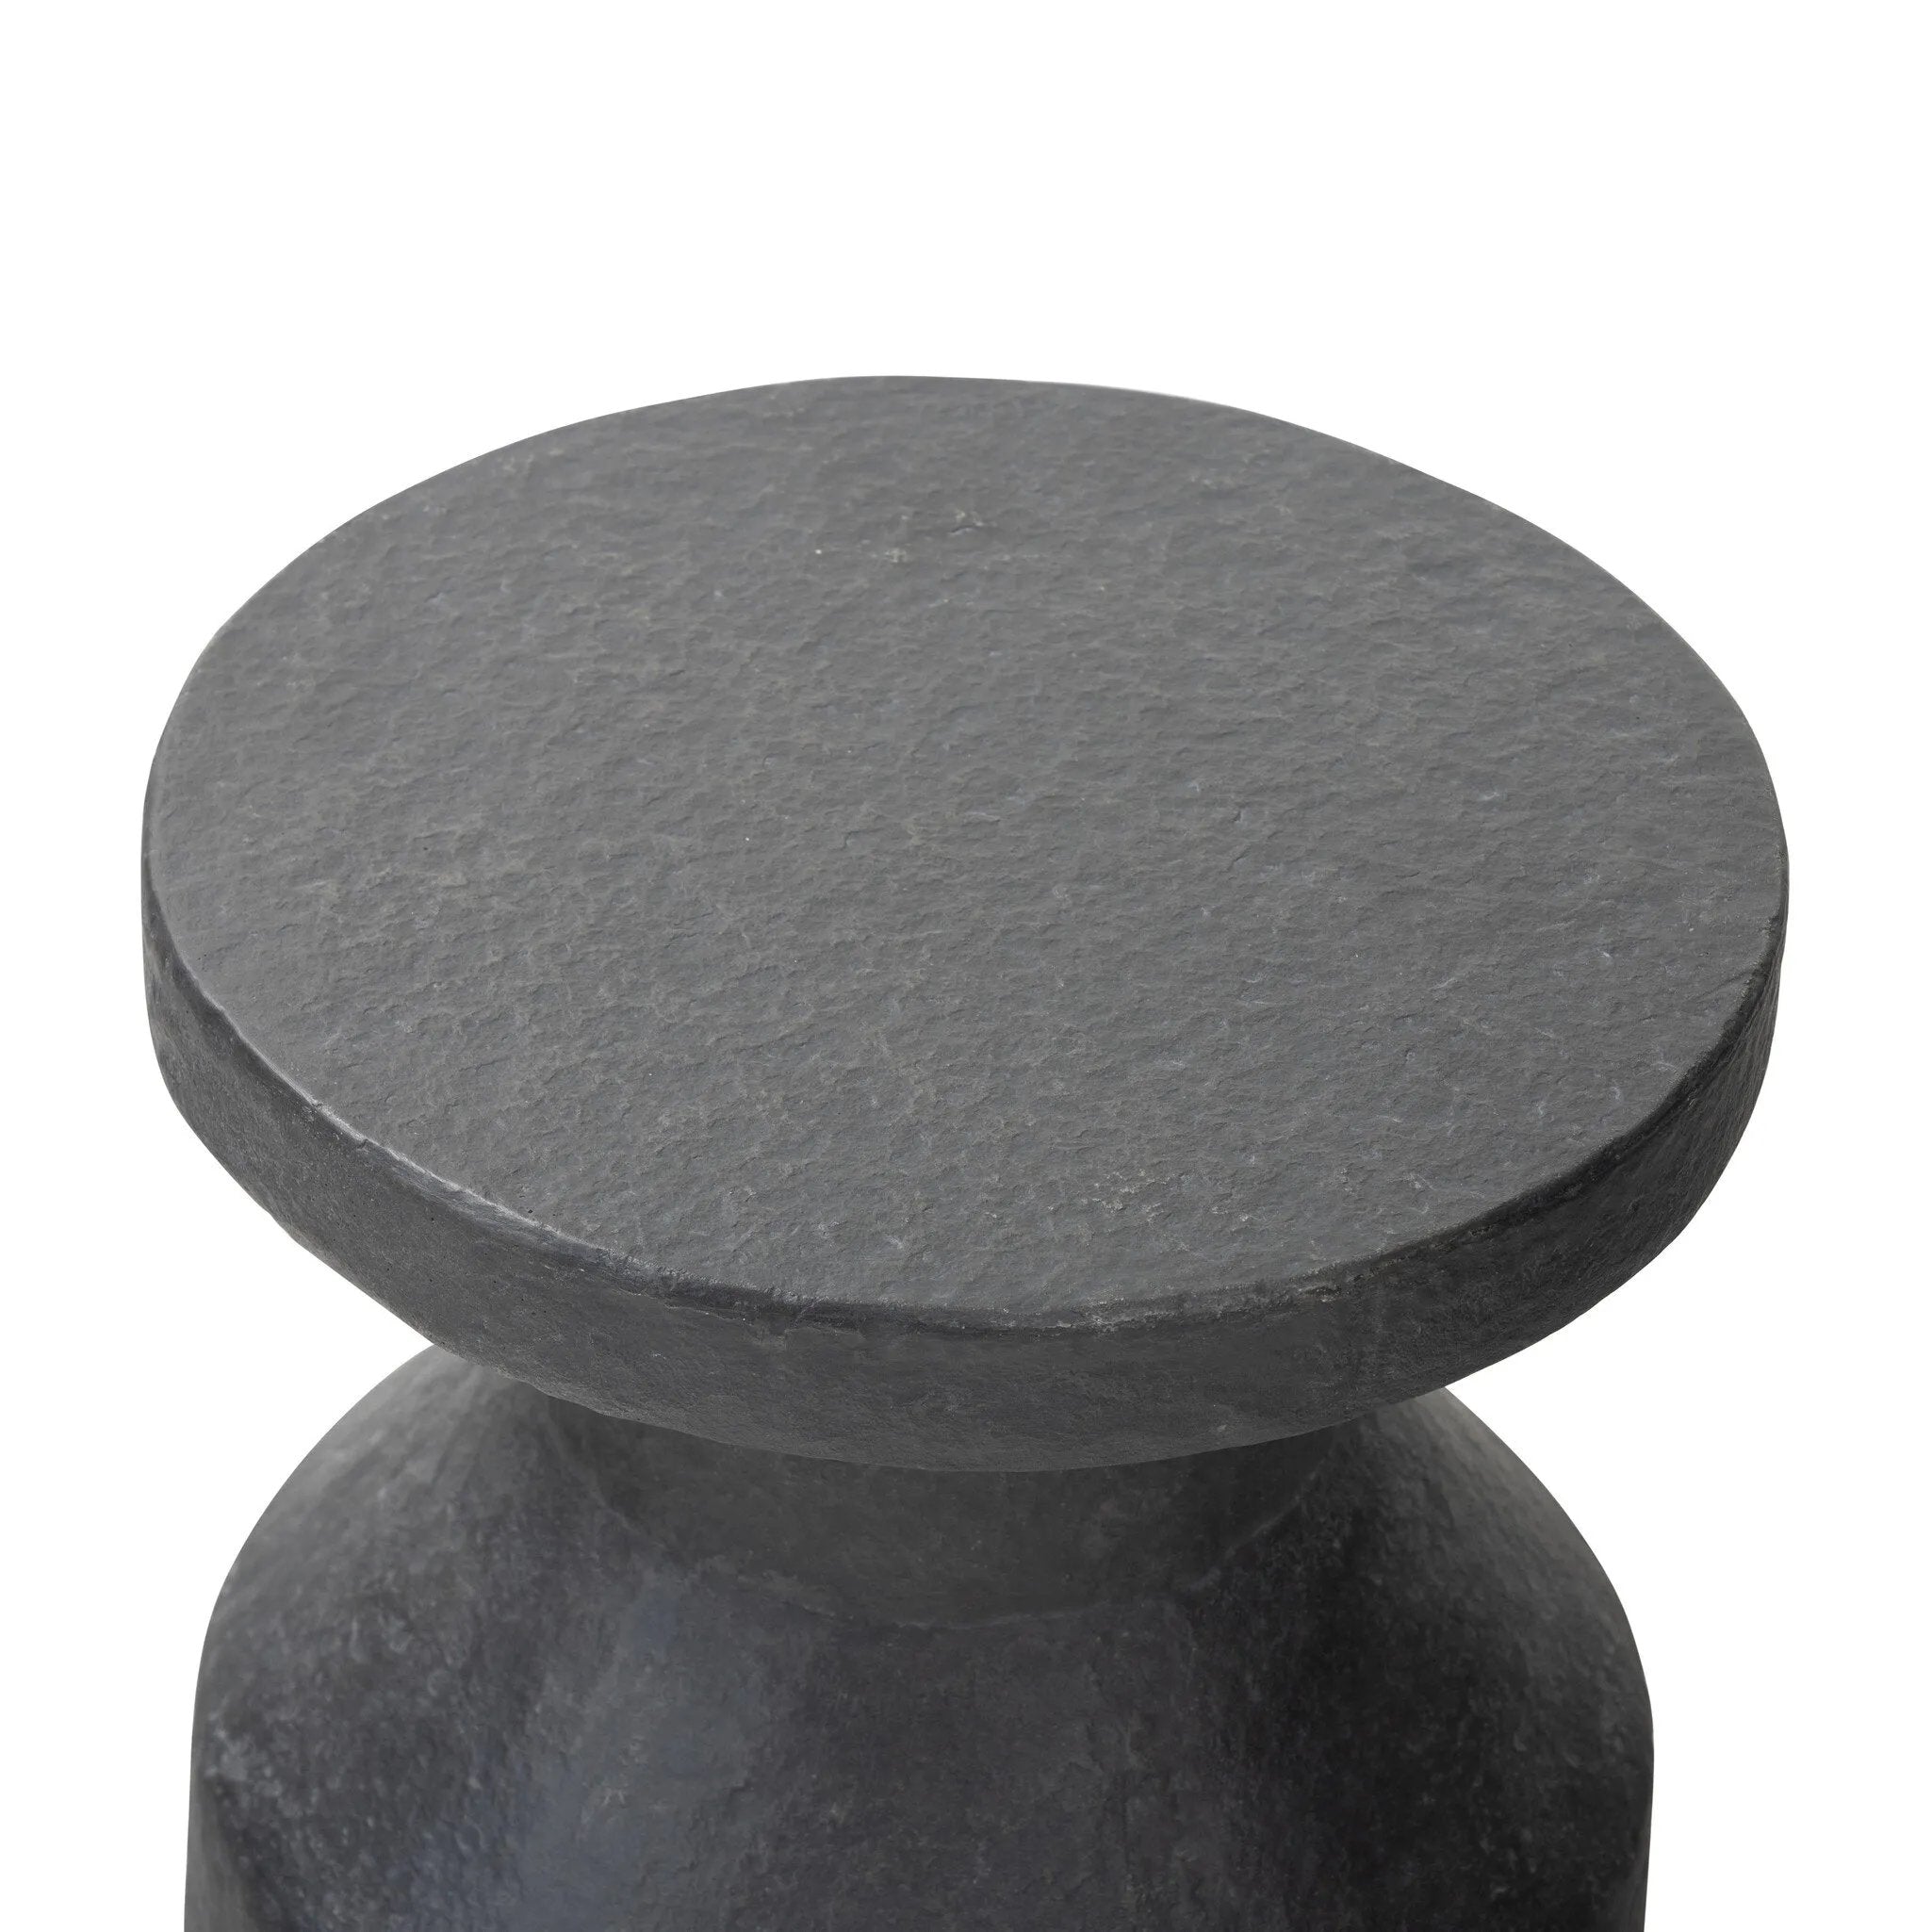 With heavy texture and contemporary shaping, an end table of distressed grey concrete can be styled just about anywhere.Collection: Chandle Amethyst Home provides interior design, new home construction design consulting, vintage area rugs, and lighting in the Portland metro area.